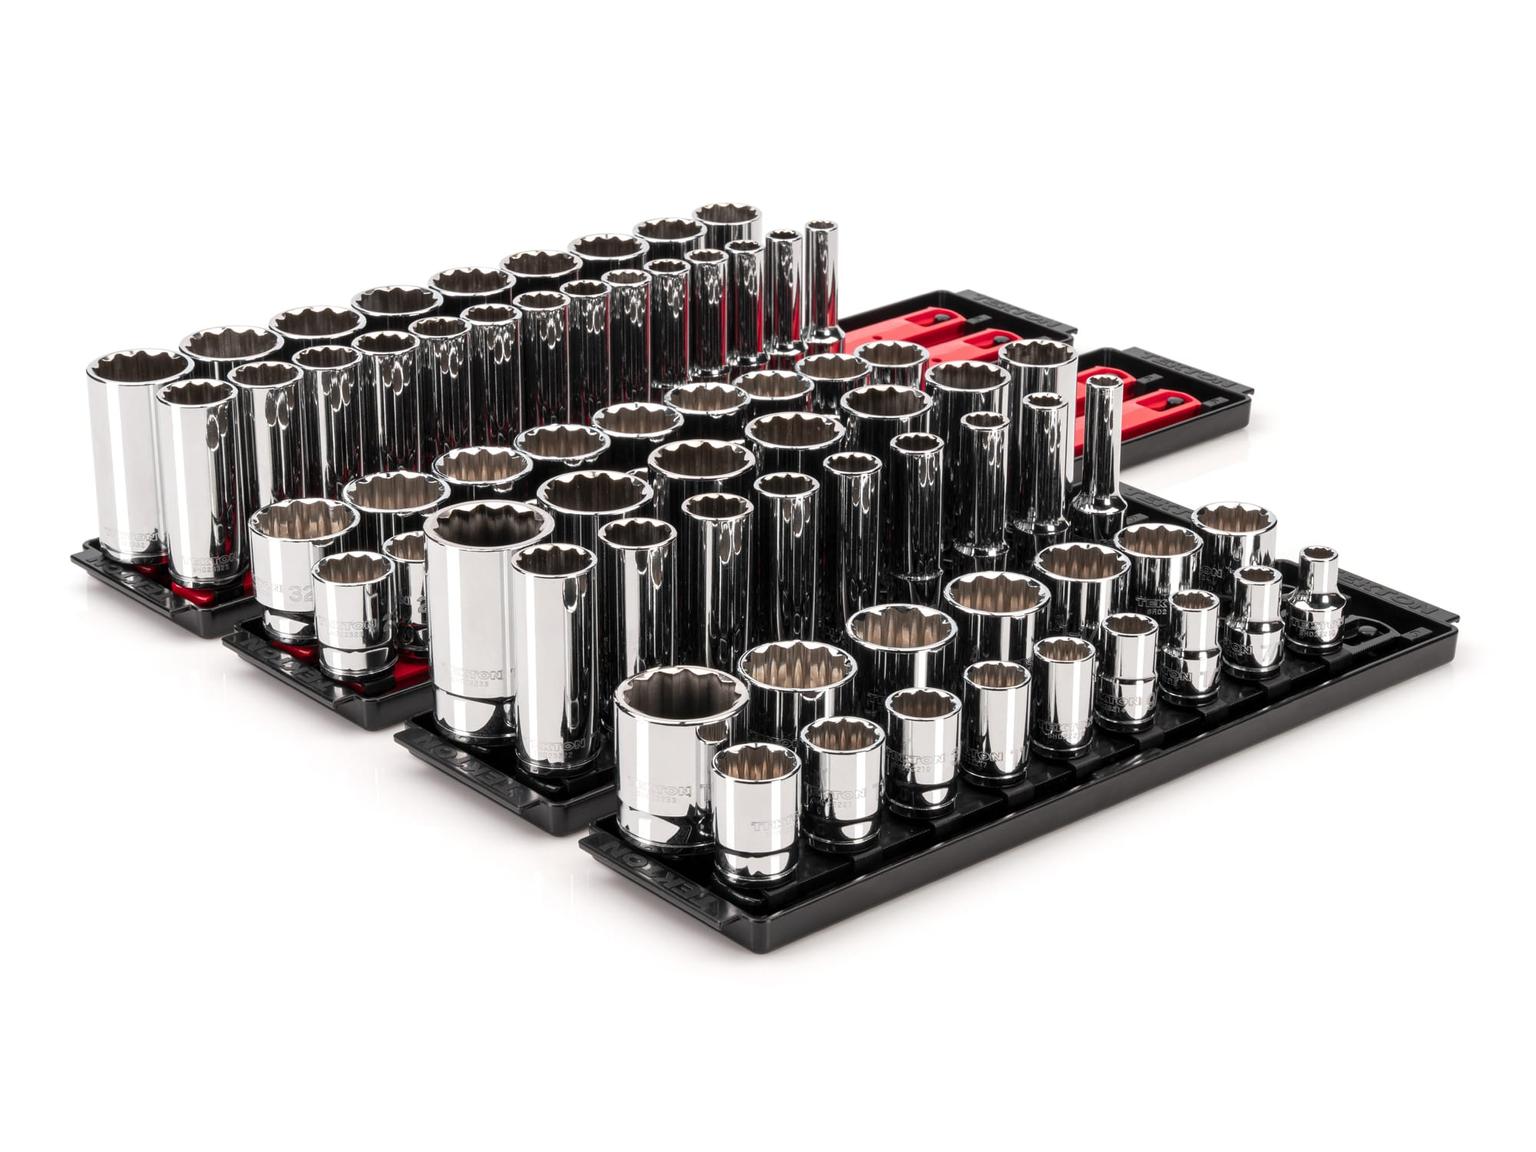 TEKTON SHD92216-T 1/2 Inch Drive 12-Point Socket Set with Rails, 78-Piece (3/8-1-5/16 in., 10-32 mm)